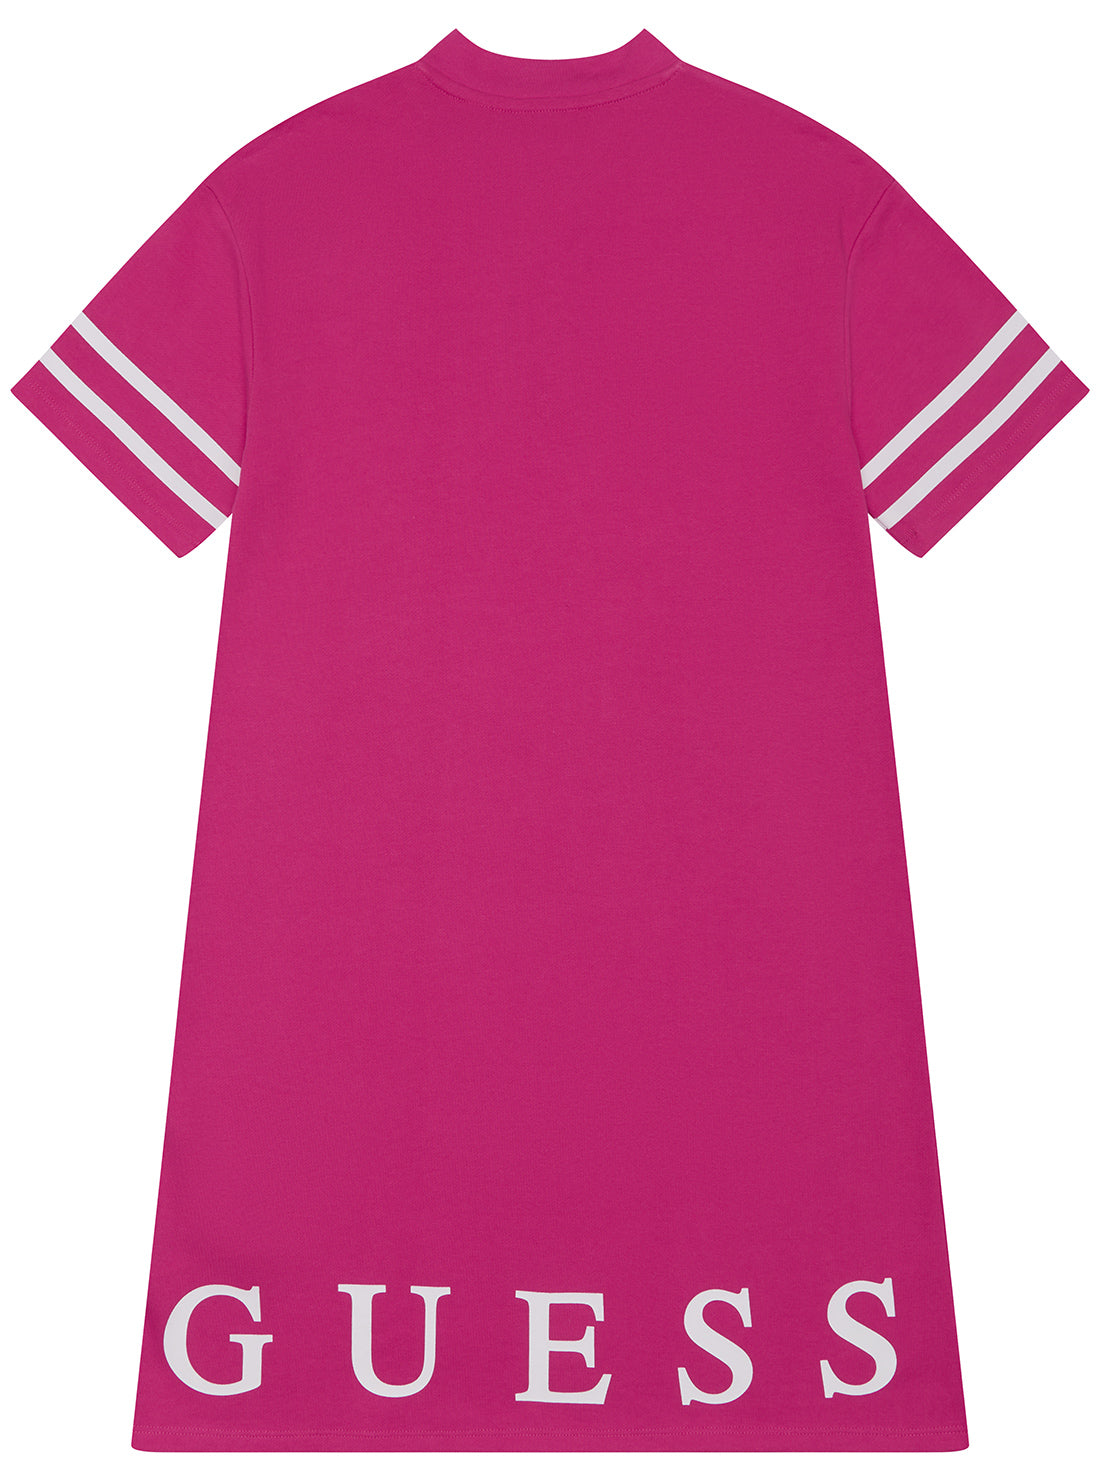 GUESS Bright Pink French Terry Short Sleeve Dress (2-7) back view